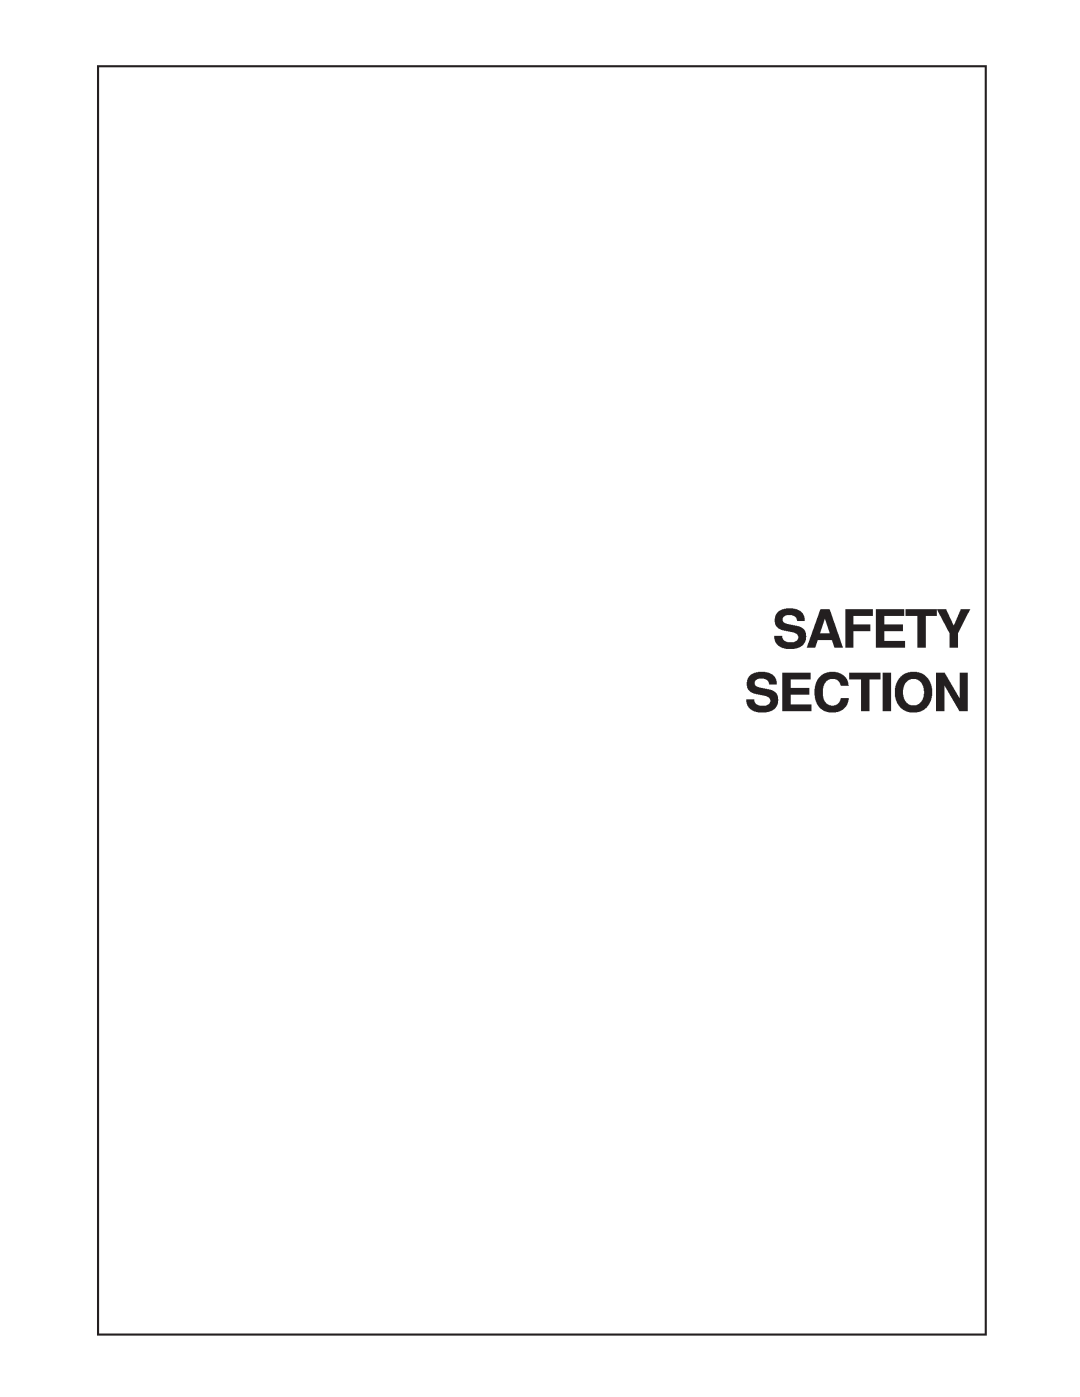 Tiger Products Co., Ltd TS 100A manual Safety Section 